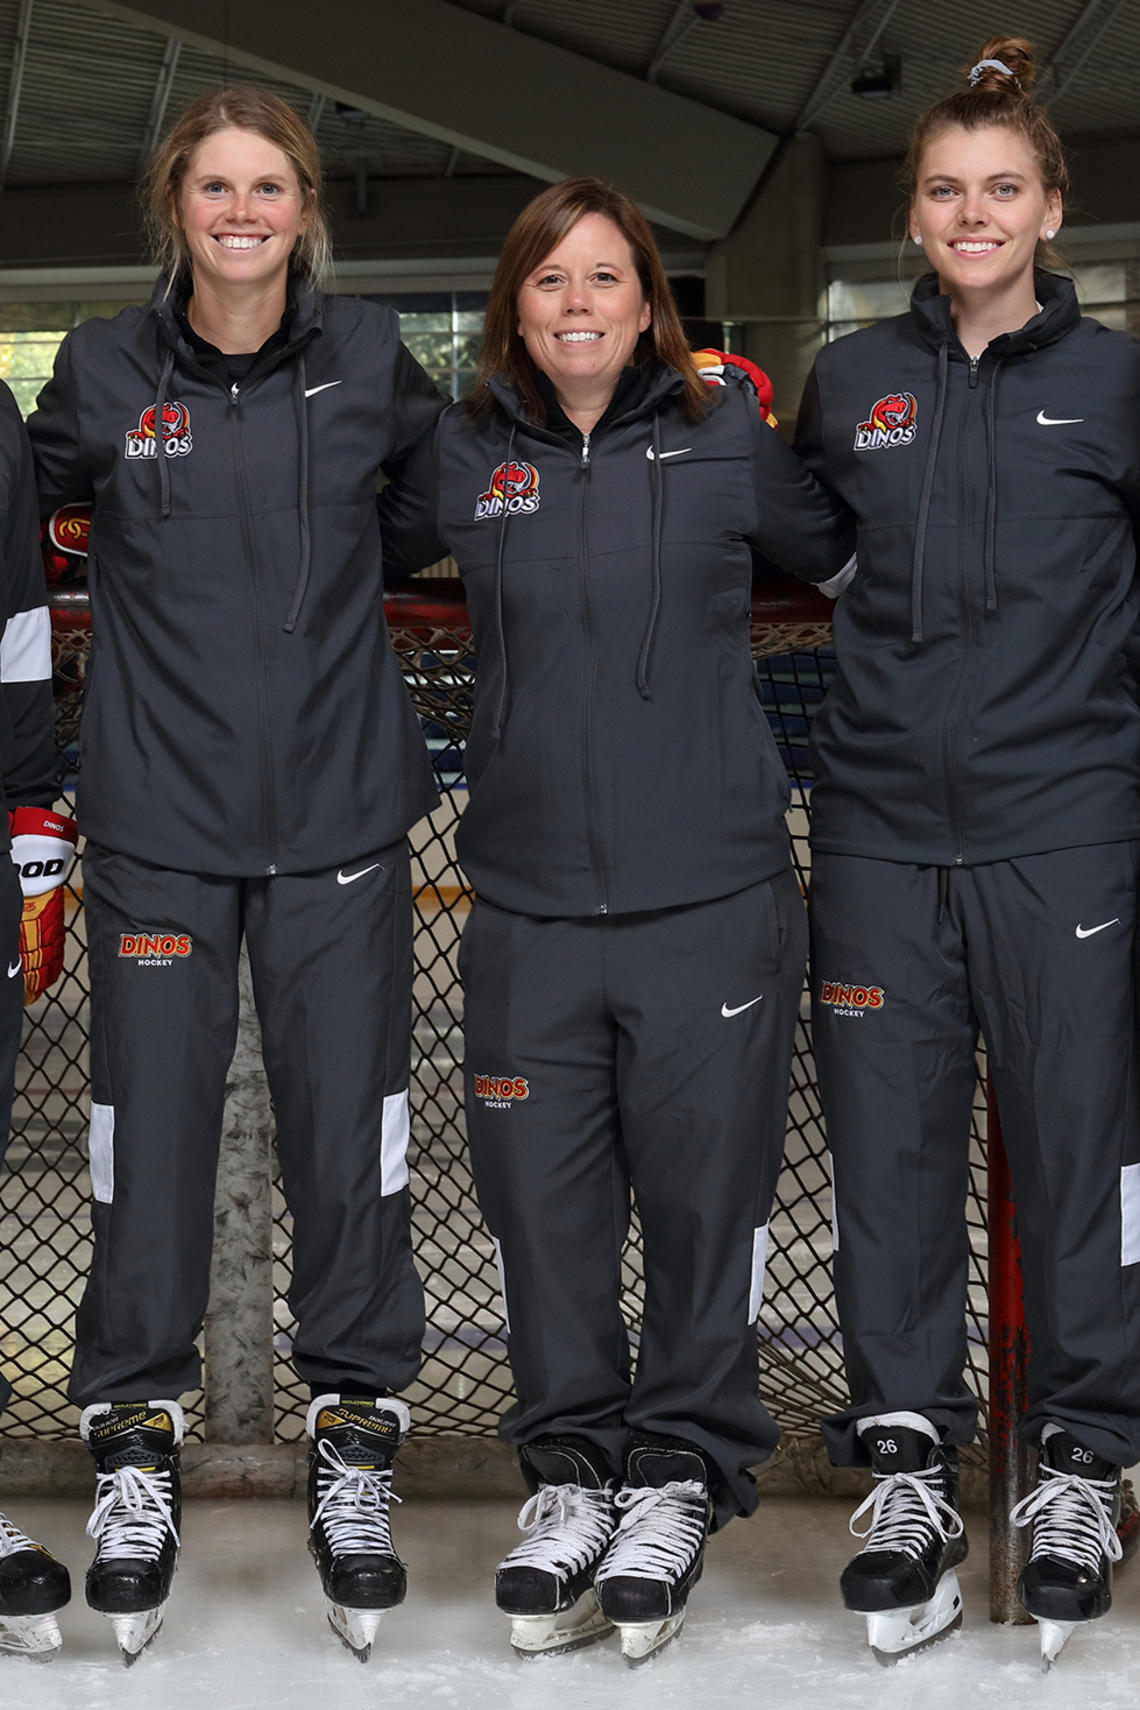 Carla MacLeod, Dinos head coach of hockey, centre, with members of her team. 